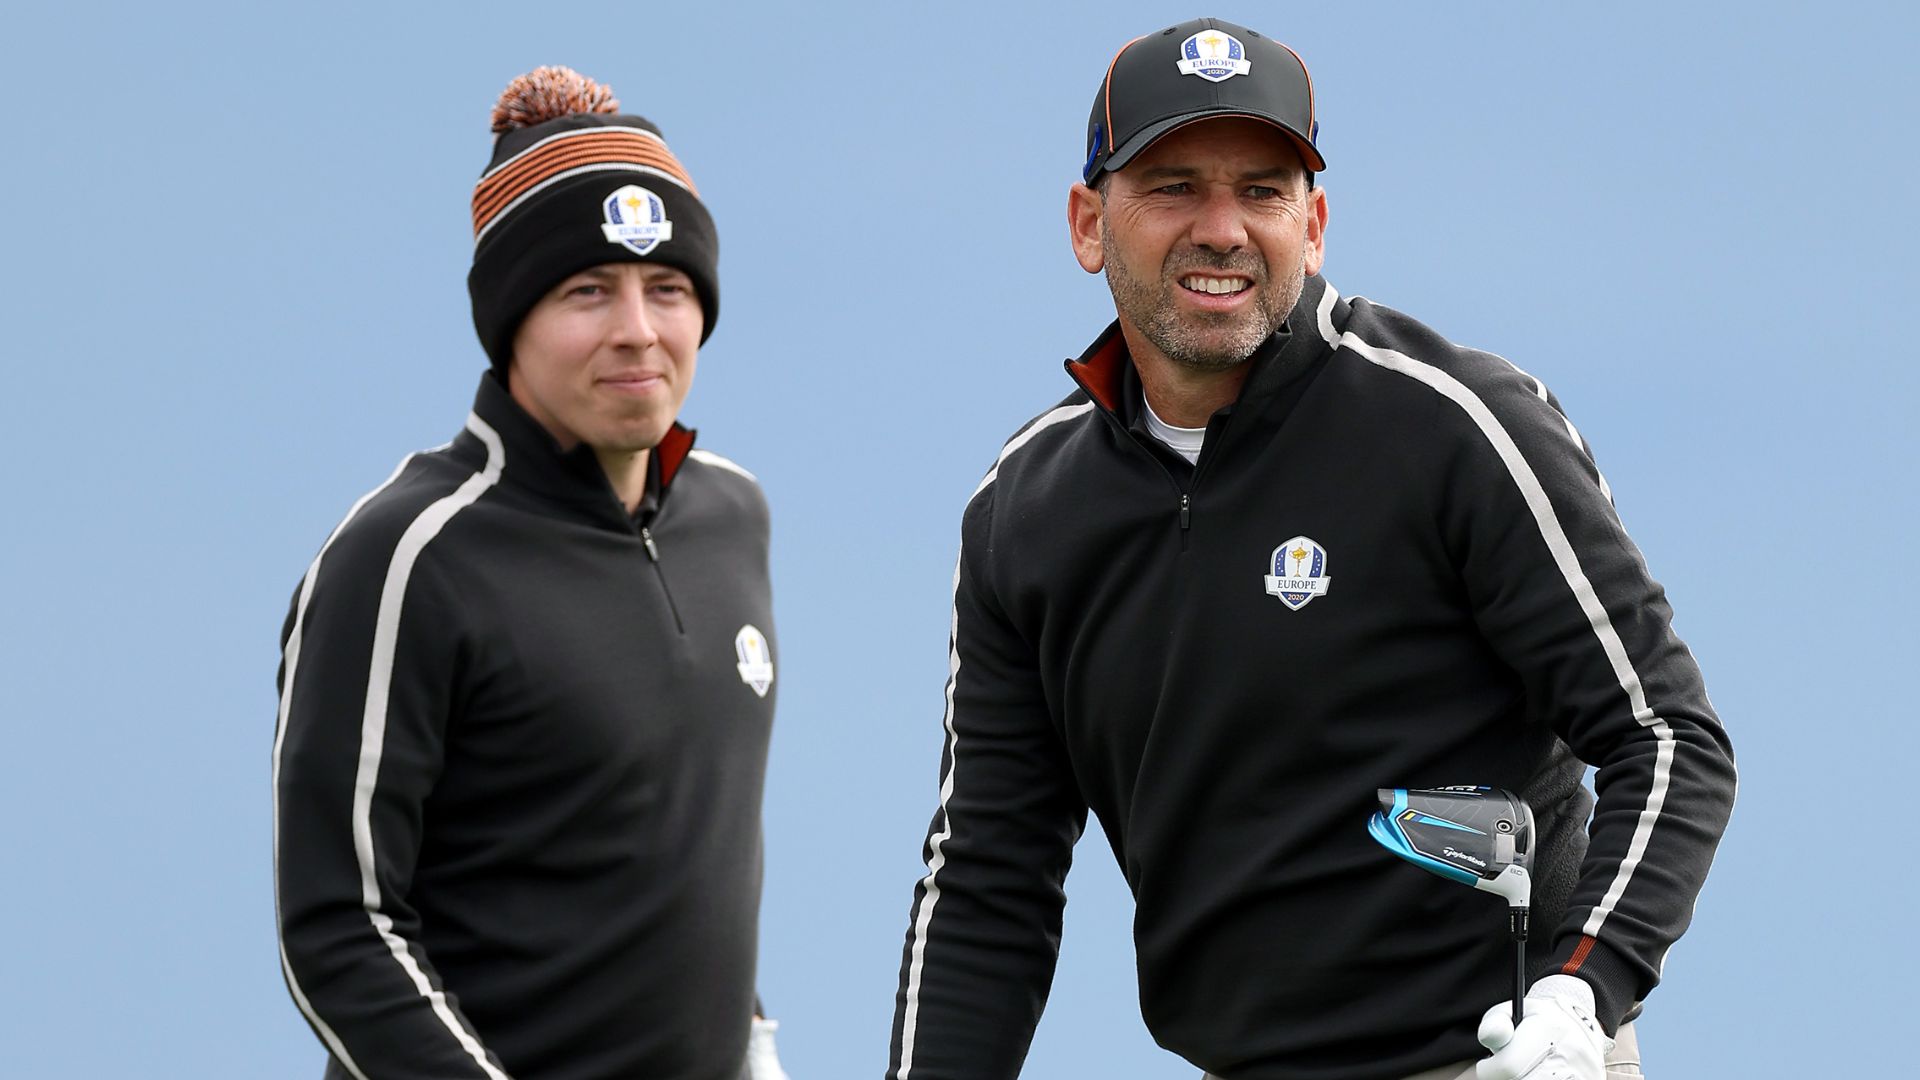 Matt Fitzpatrick in favor of playing Ryder Cup with LIV Golf players: ‘I just want to win’